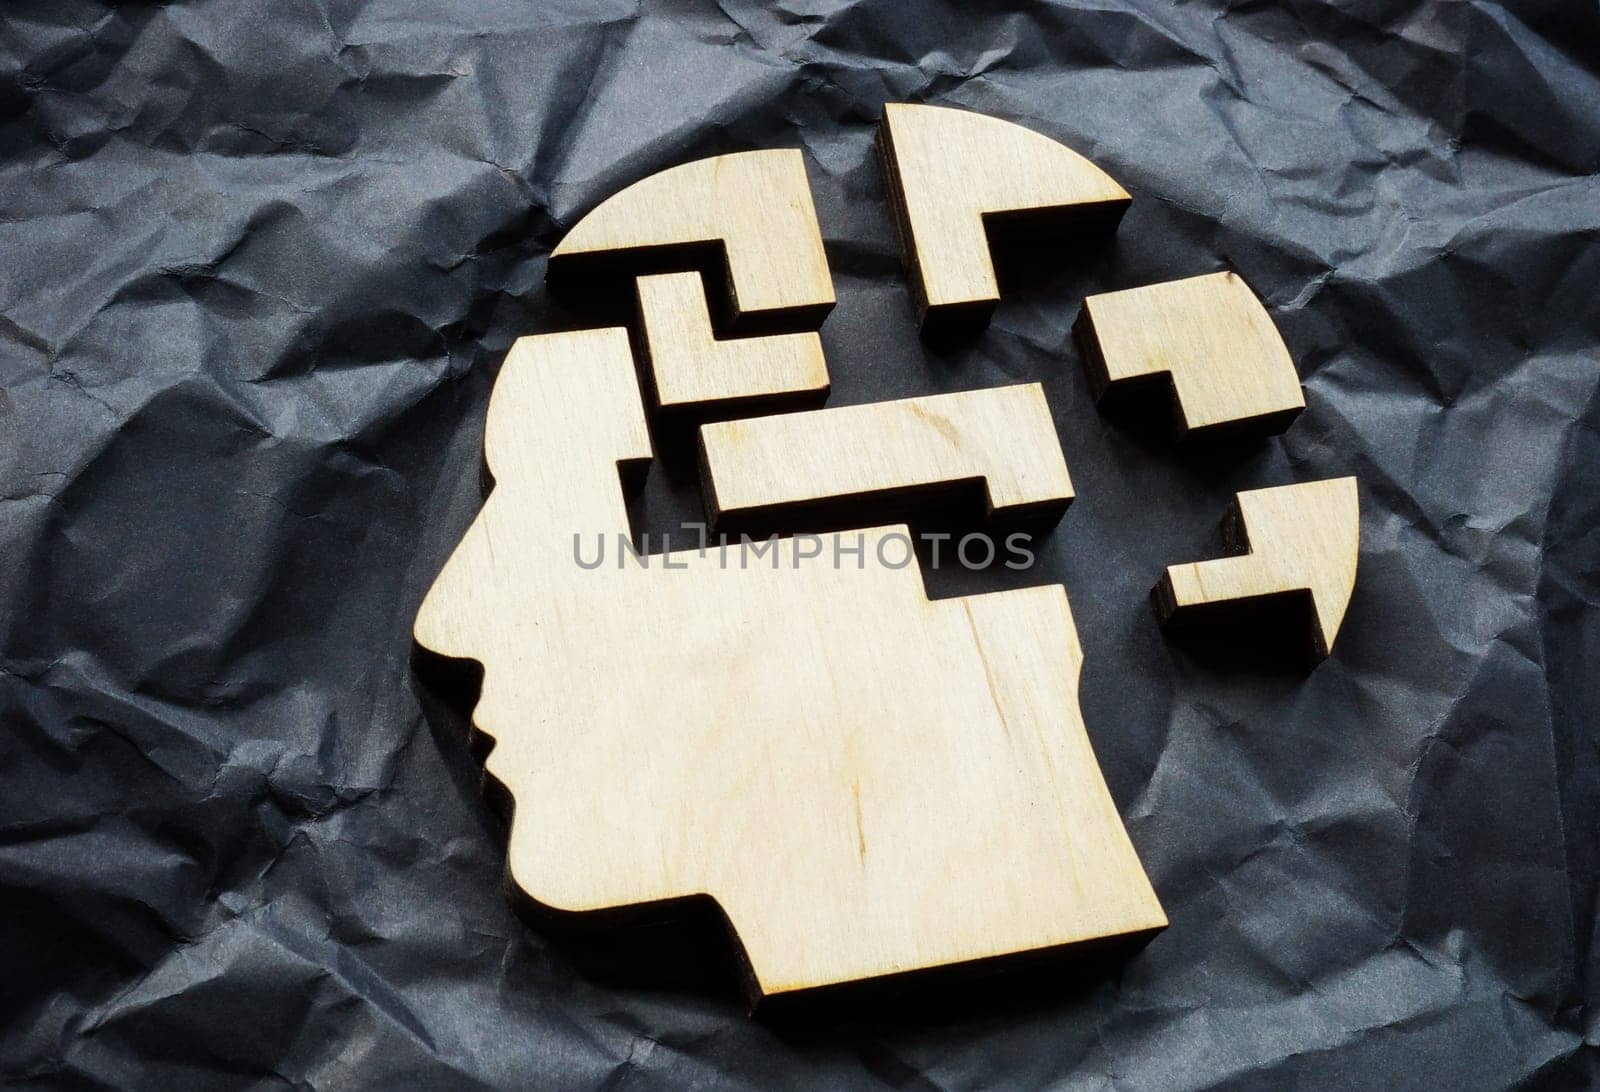 Head falls apart into puzzle pieces. Mental illness or memory problems.